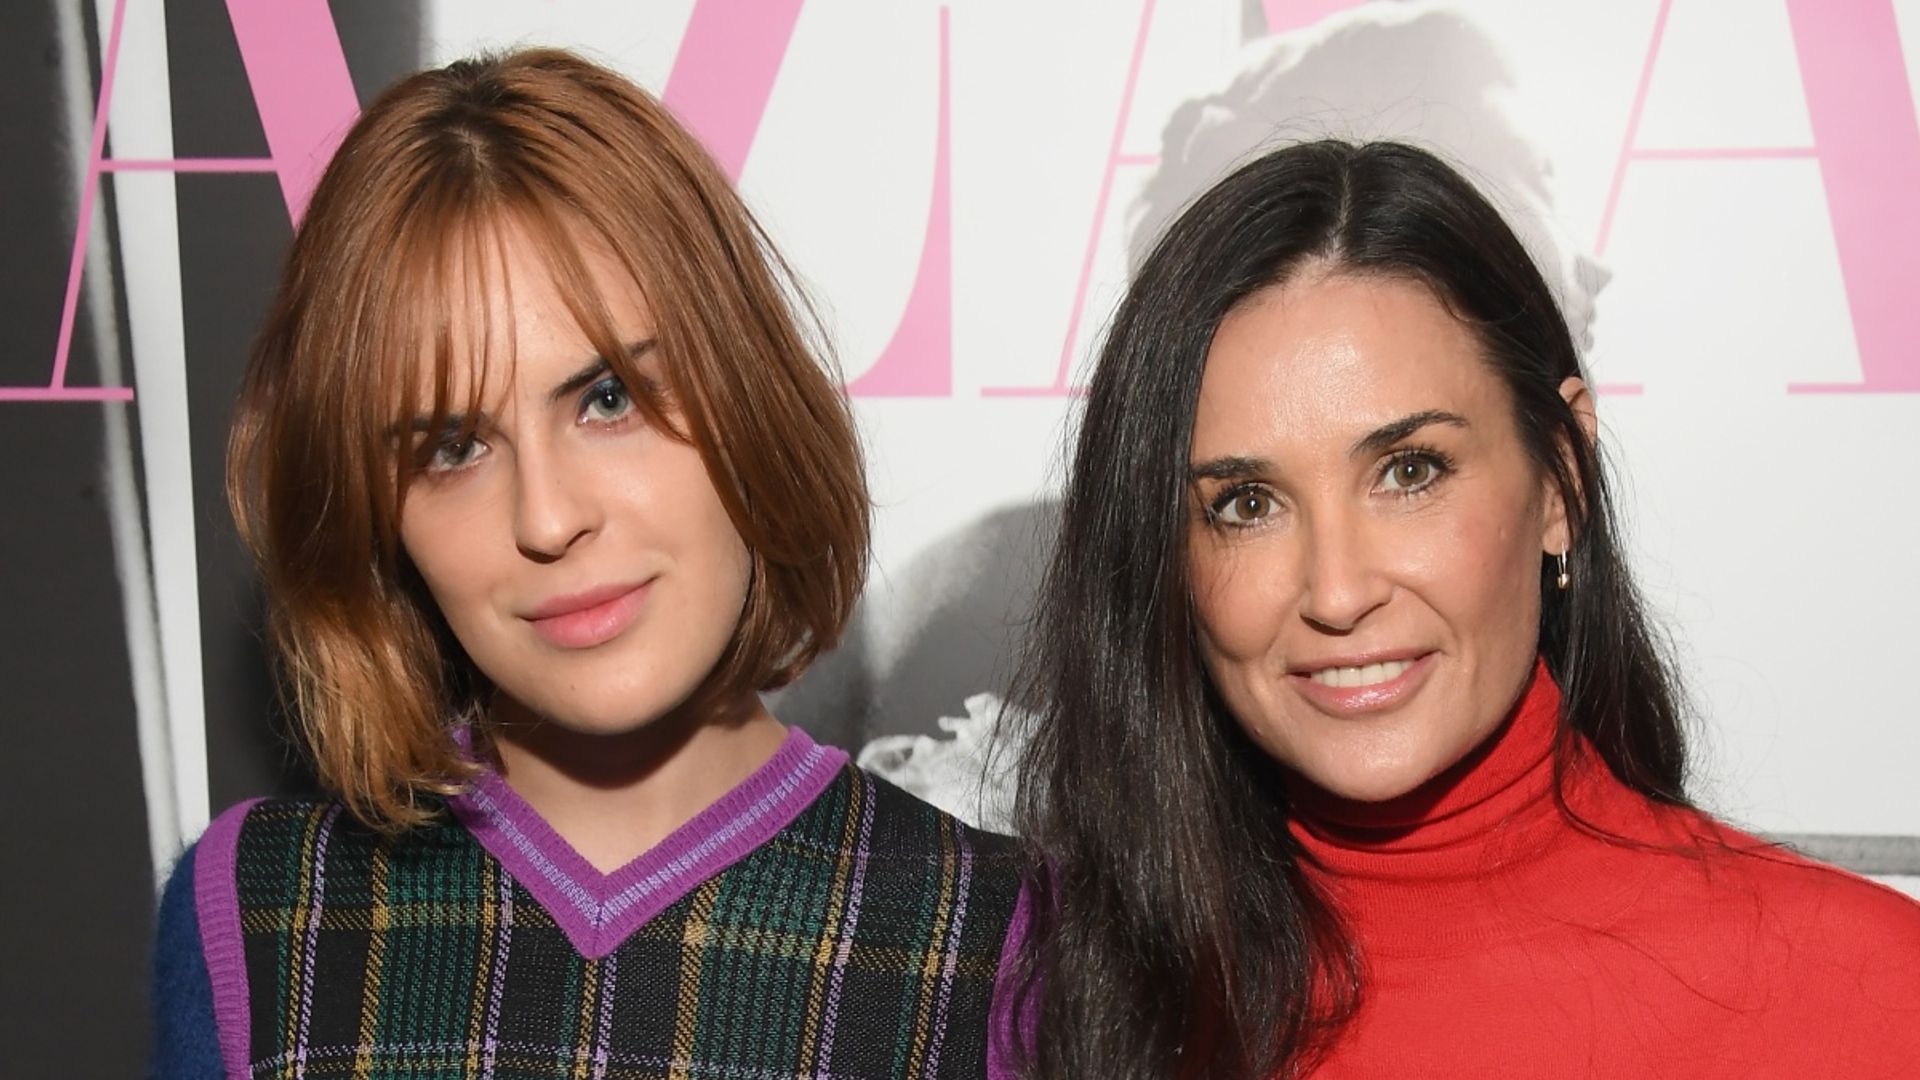 Demi Moore and daughter Tallulah Willis don festive sweaters in eye-catching new photo